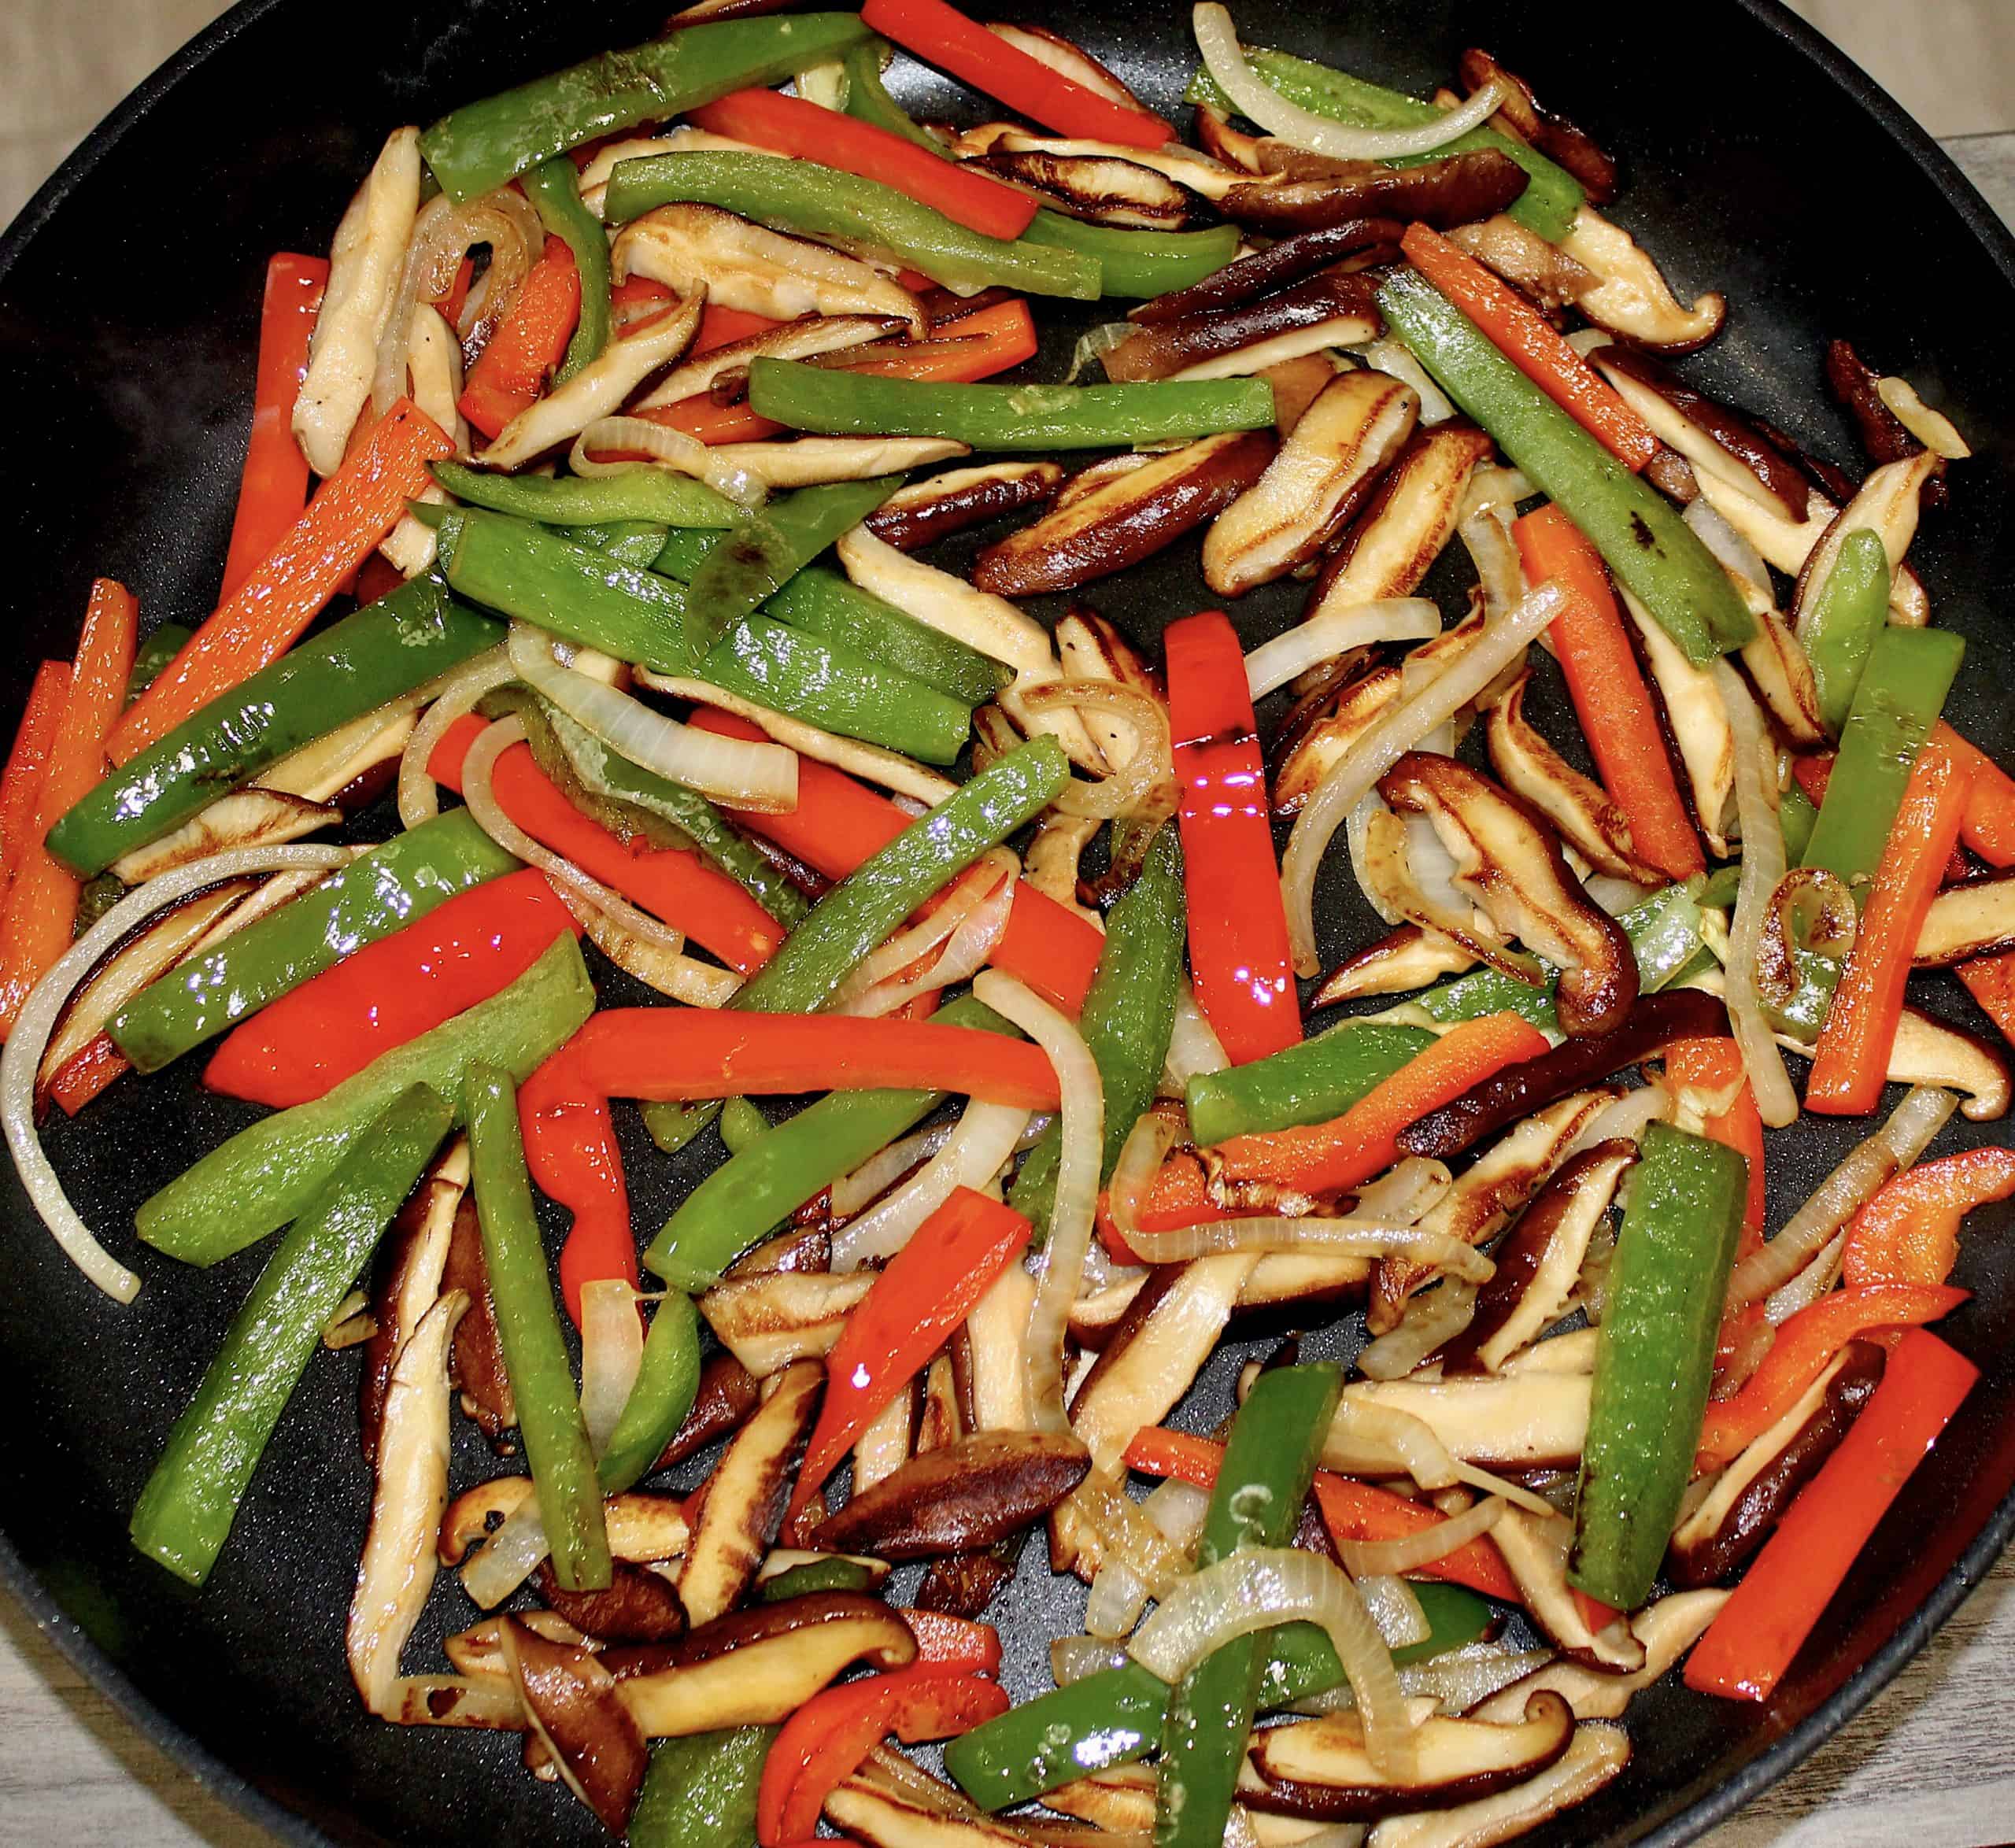 Sauteed mushrooms onions and peppers in slkillet